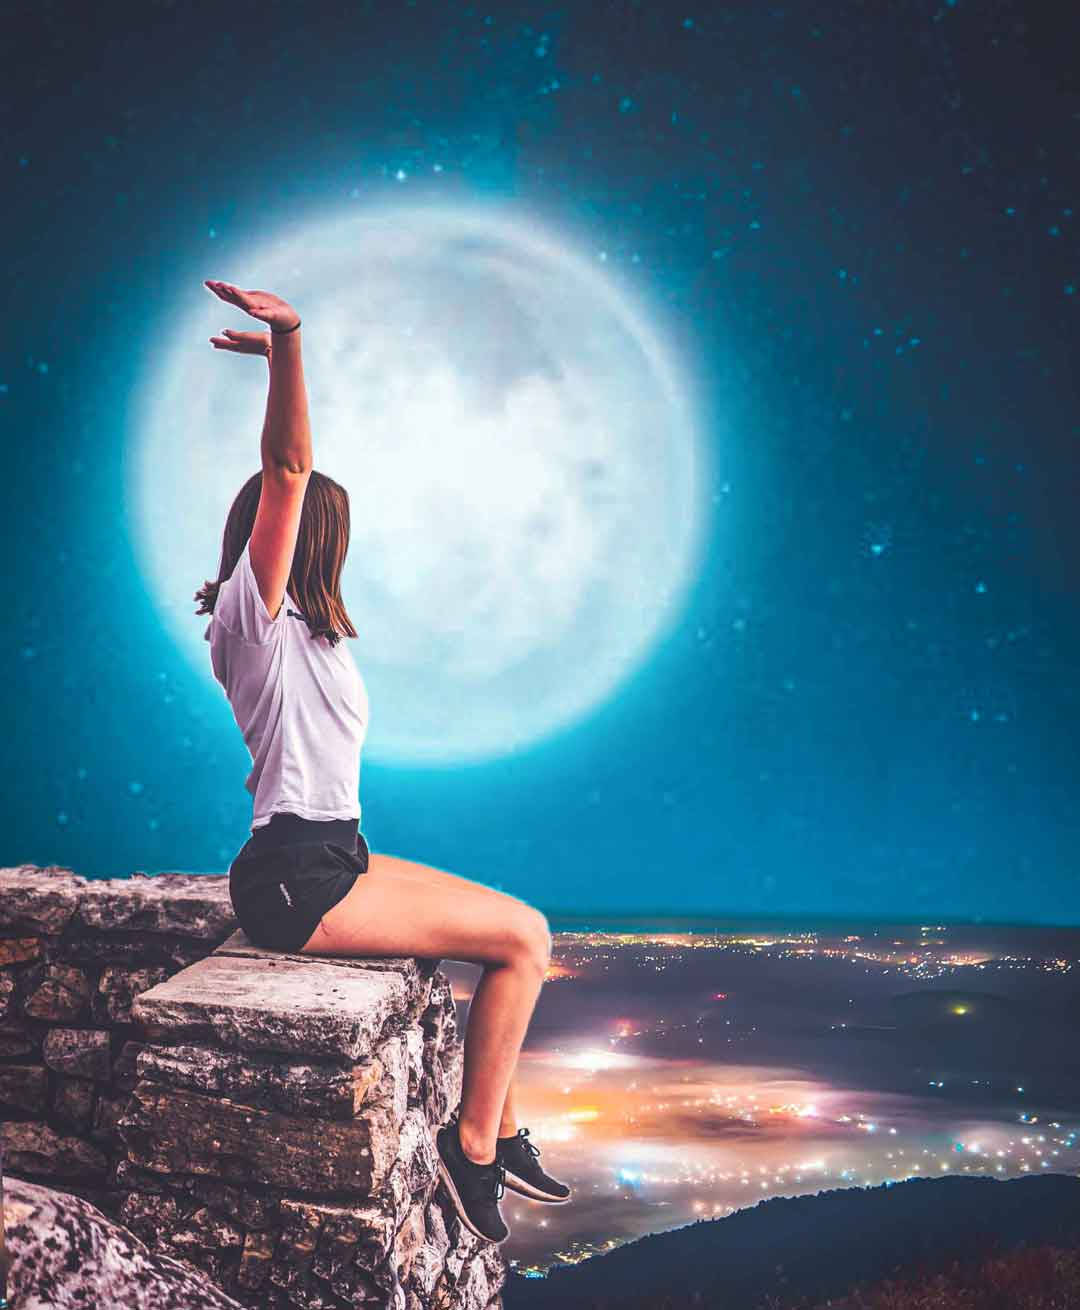 Woman With Moon Picsart Background